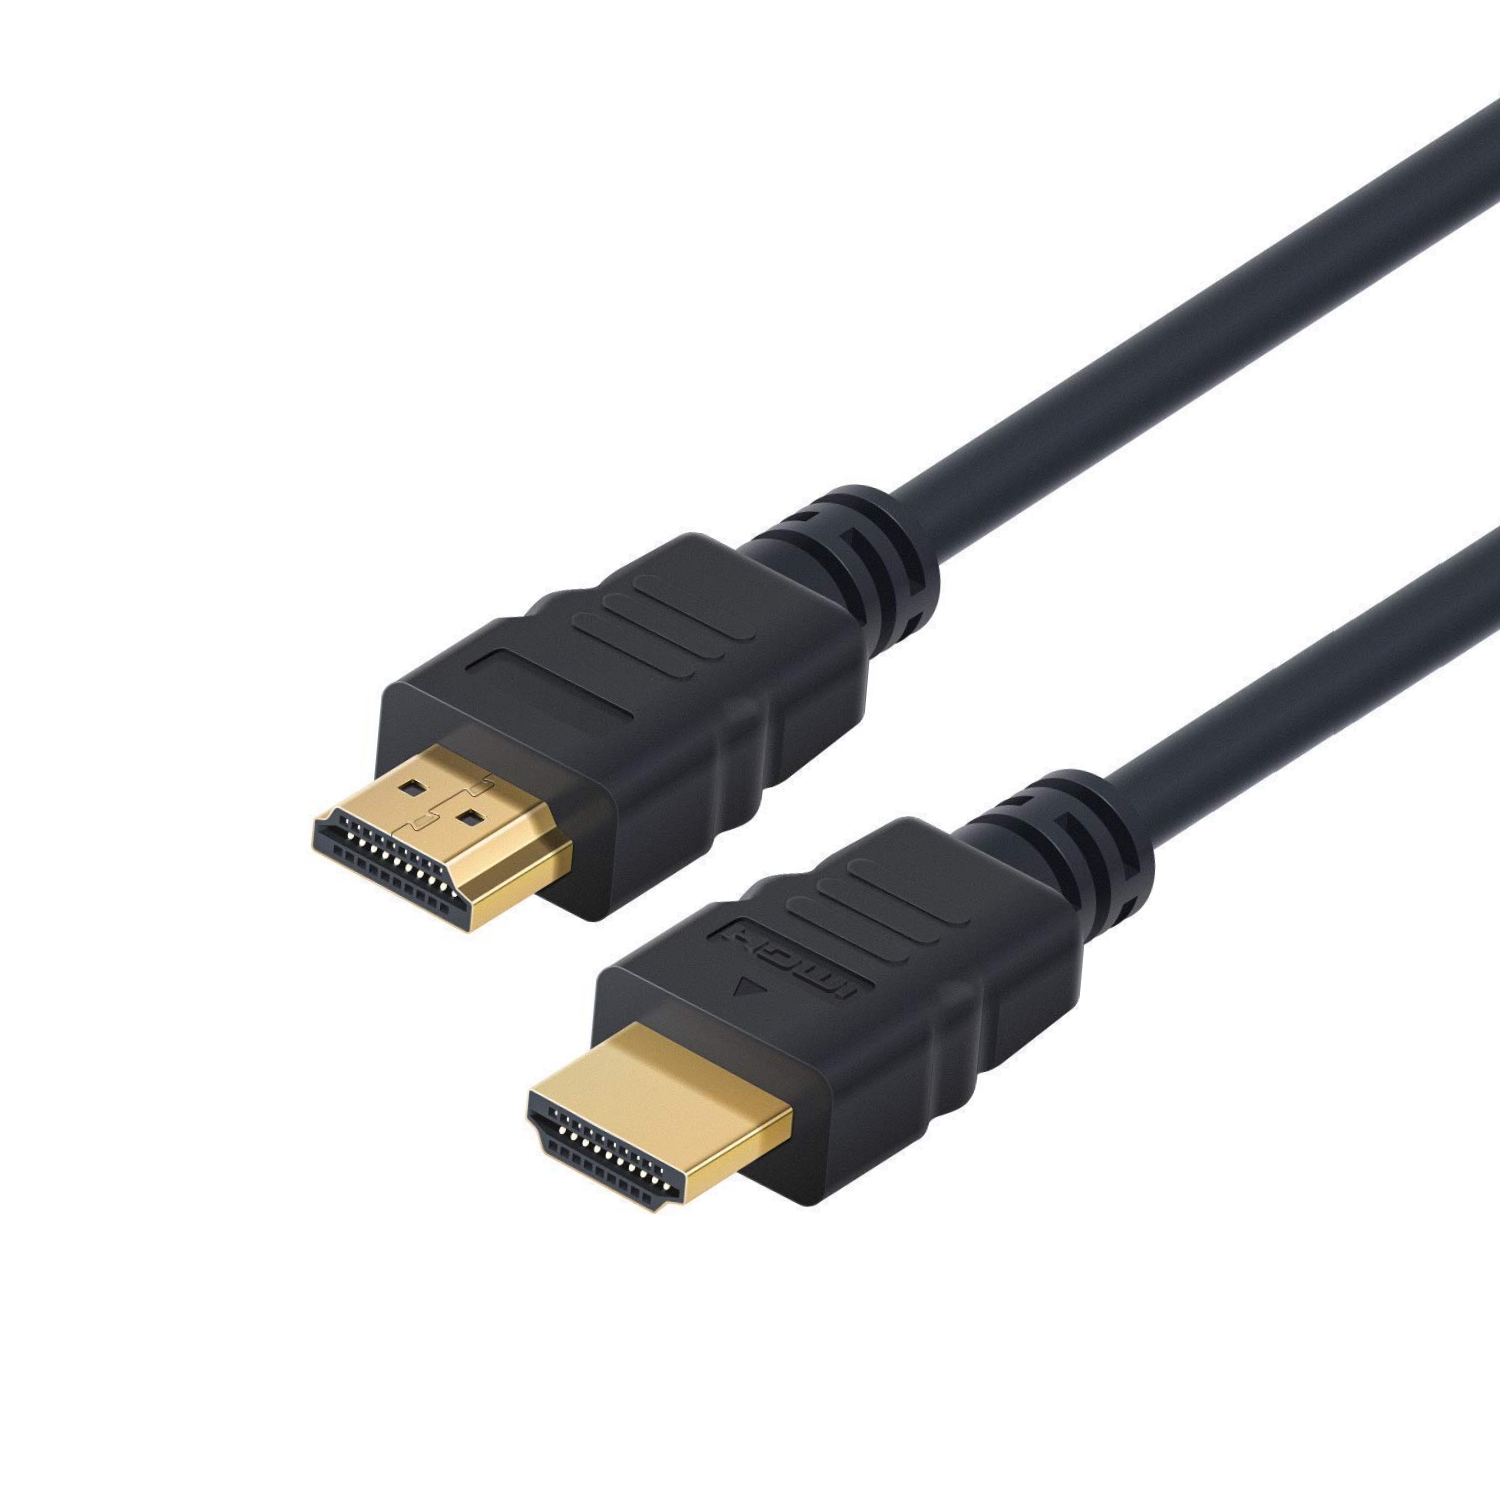 Ewent - Cable HDMI Ewent HDMI 2.1 Ultra High-Speed C/Ethernet 8K@60Hz HDR 1.8 M Negro